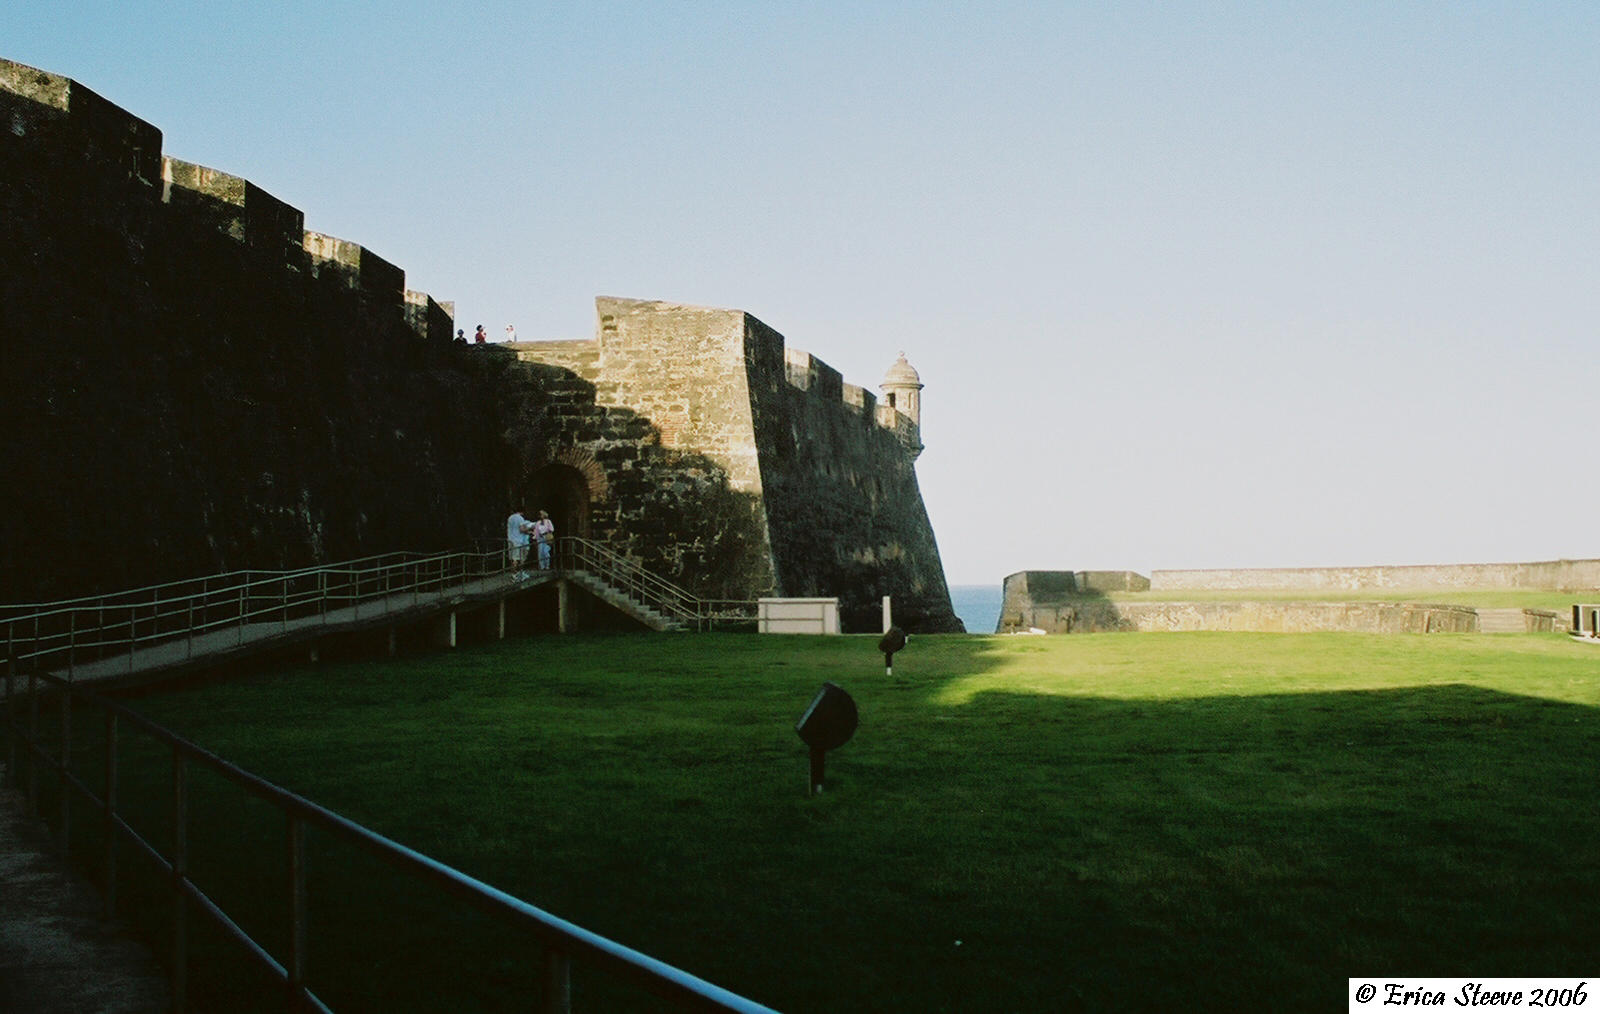 The fort's courtyard.